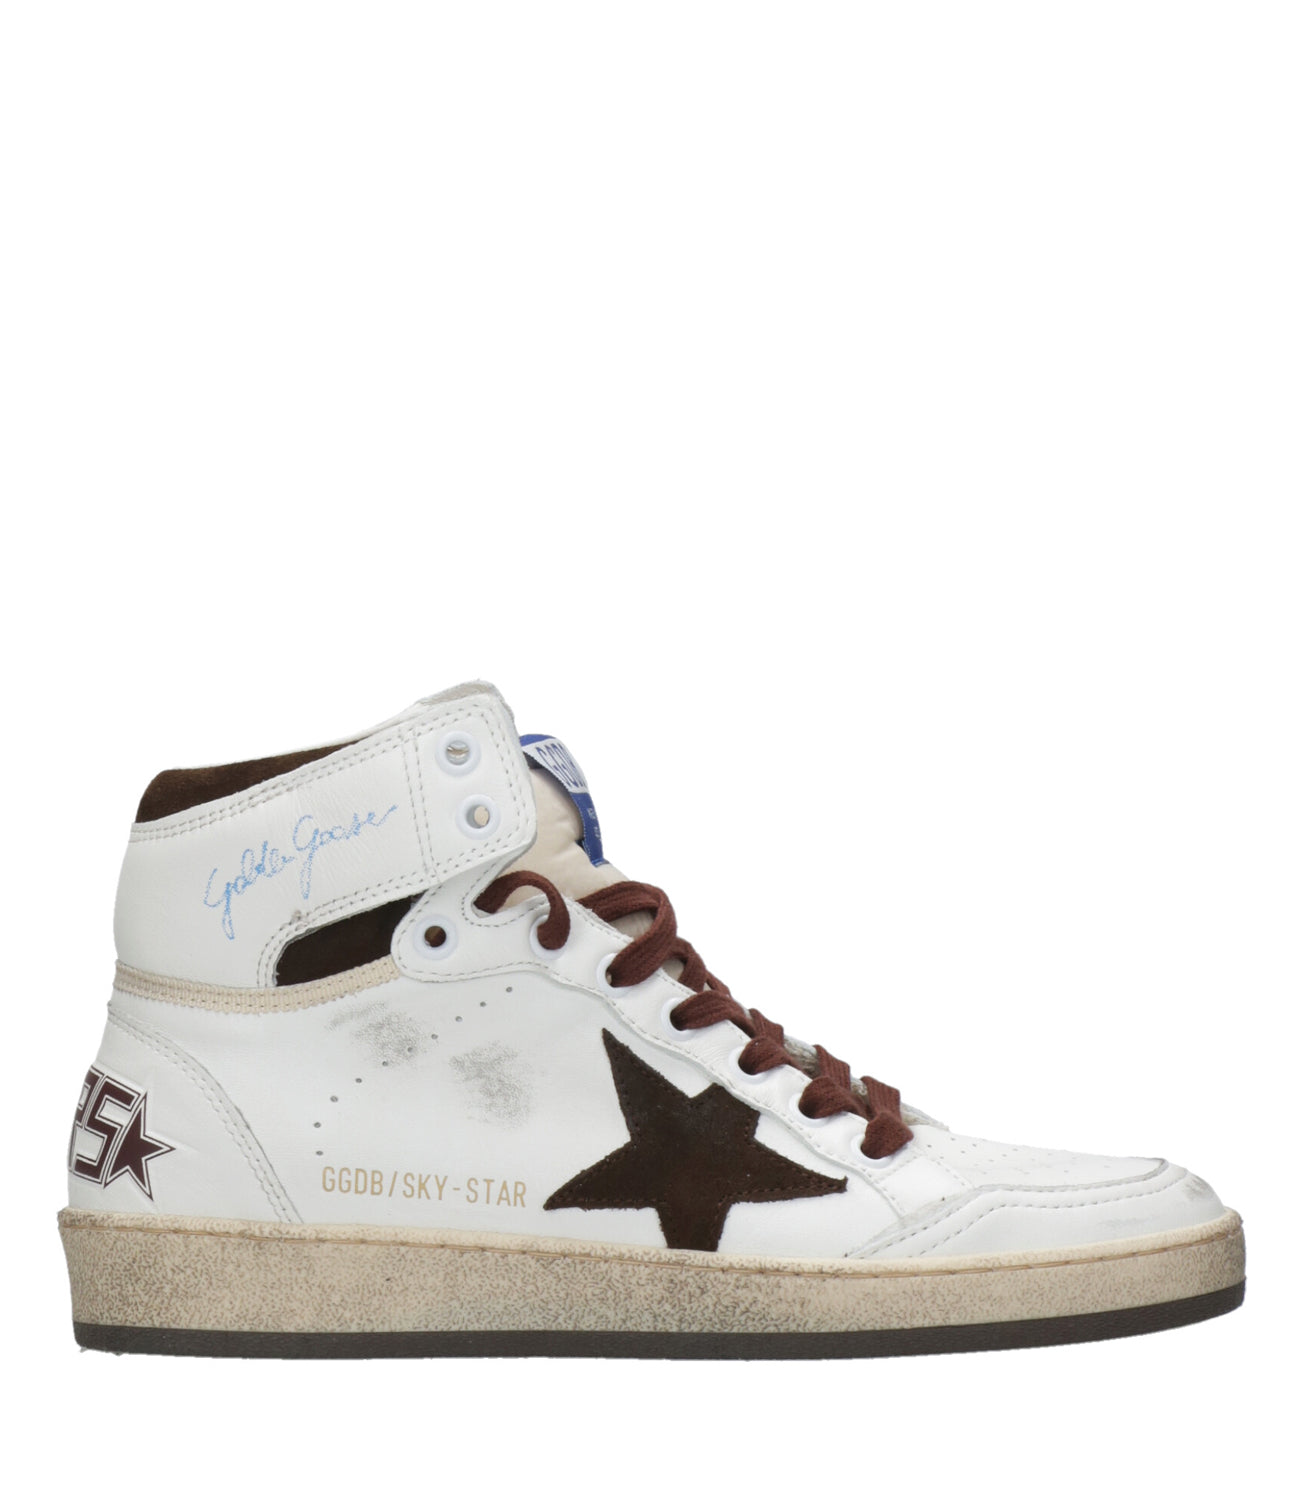 Golden Goose | Sky Star High Sneakers White, Beige and Brown